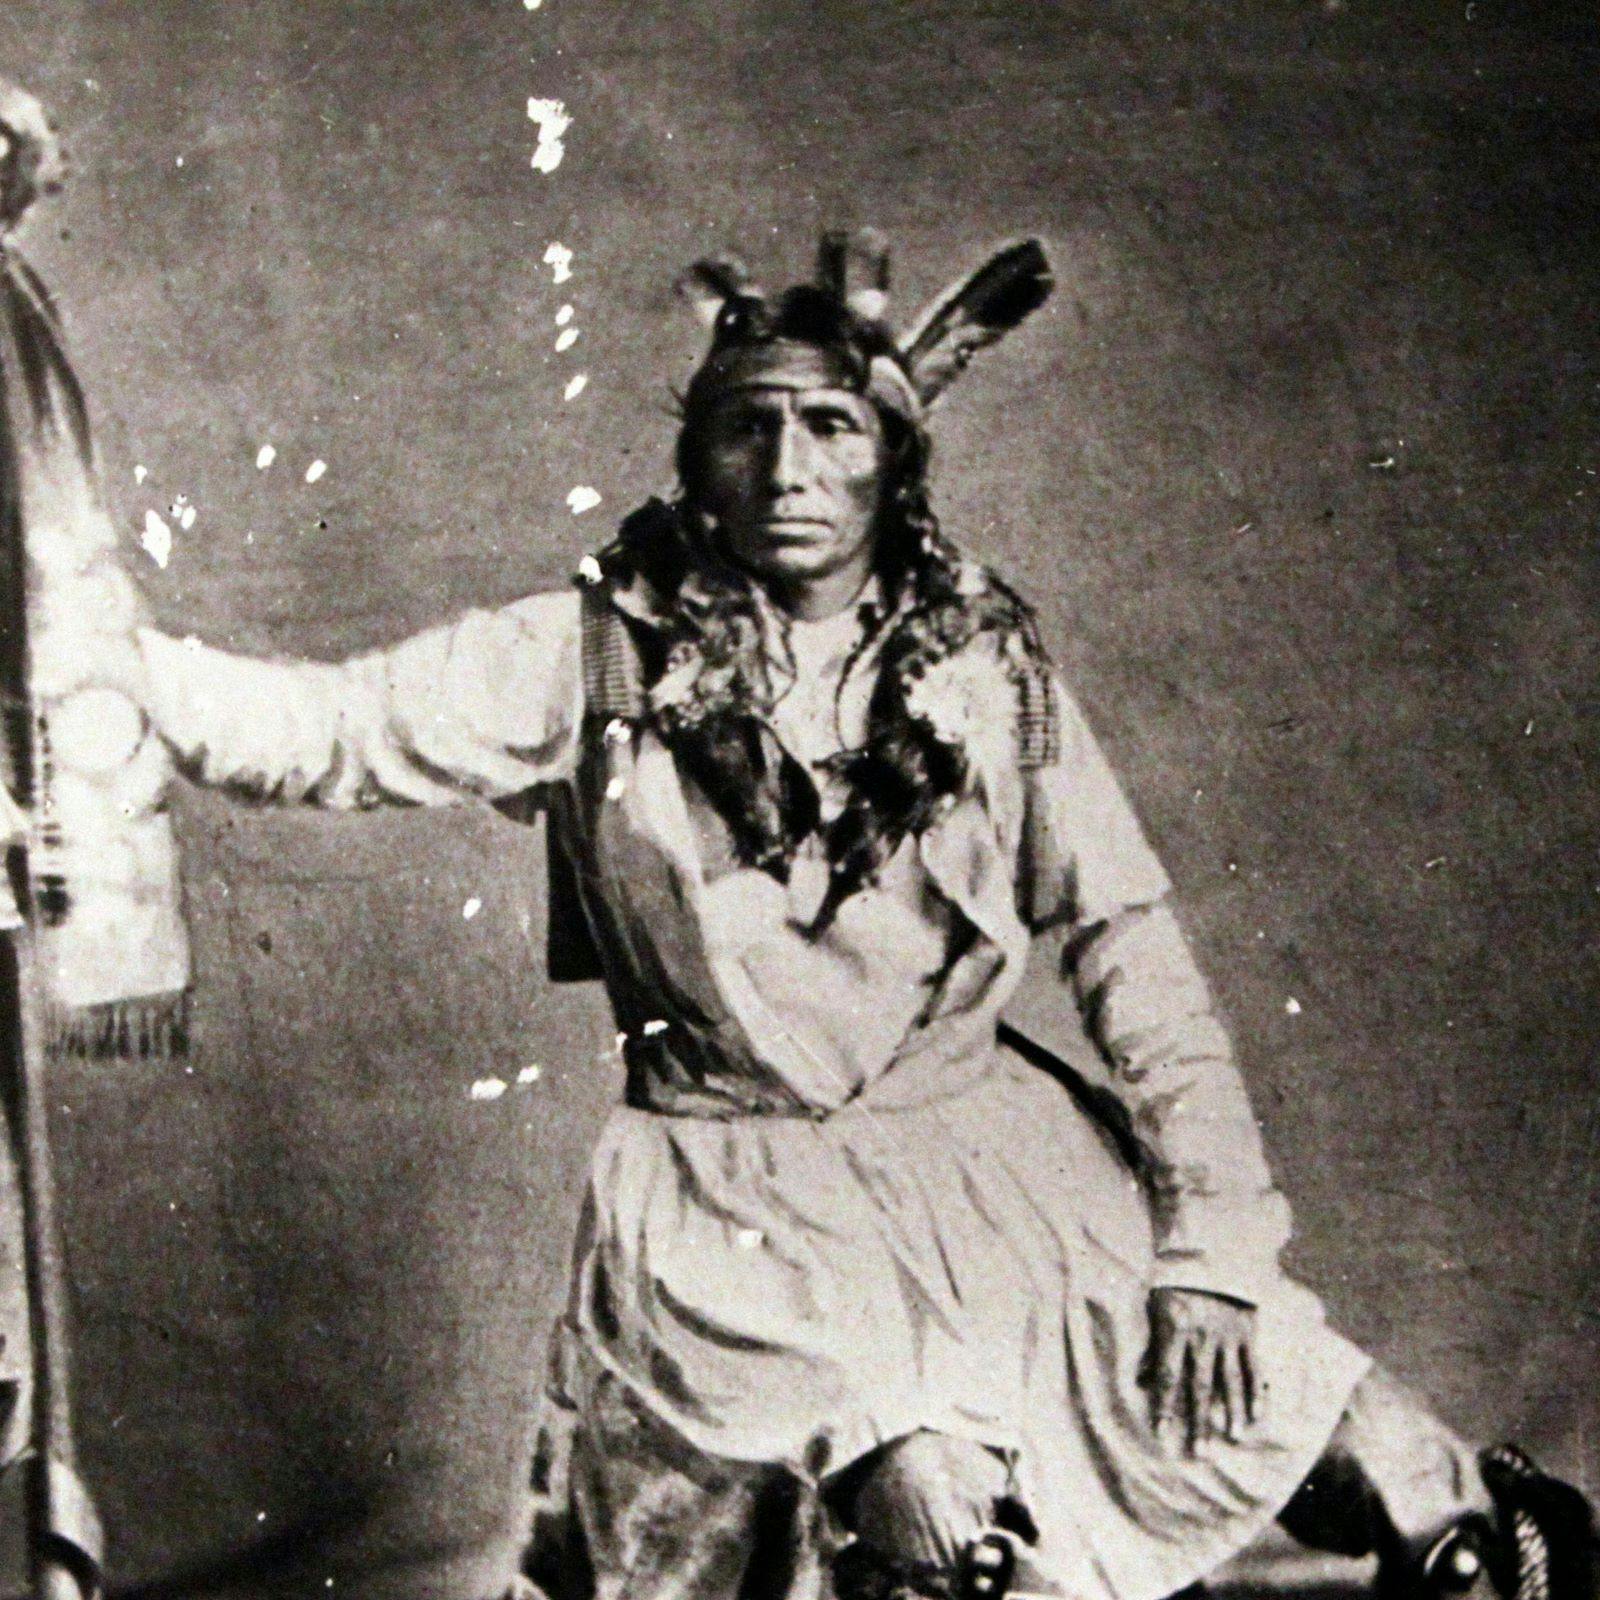 What roles did Minnesota's Native American chiefs play? And who were some notable ones?